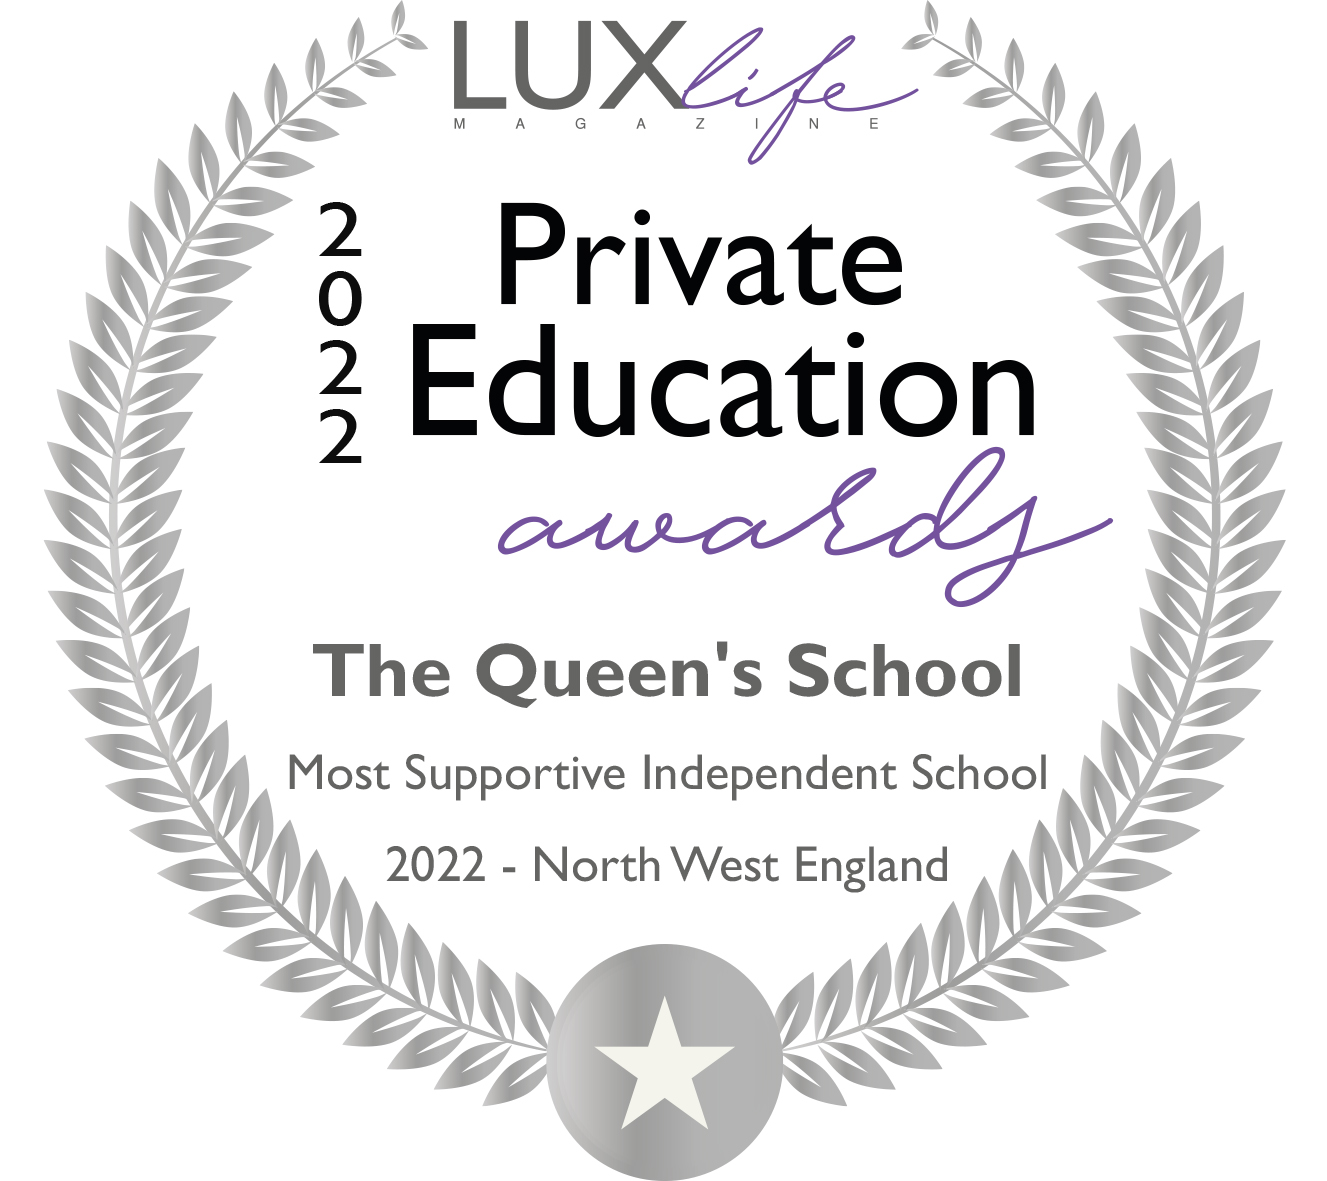 Most Supportive Independent School Award